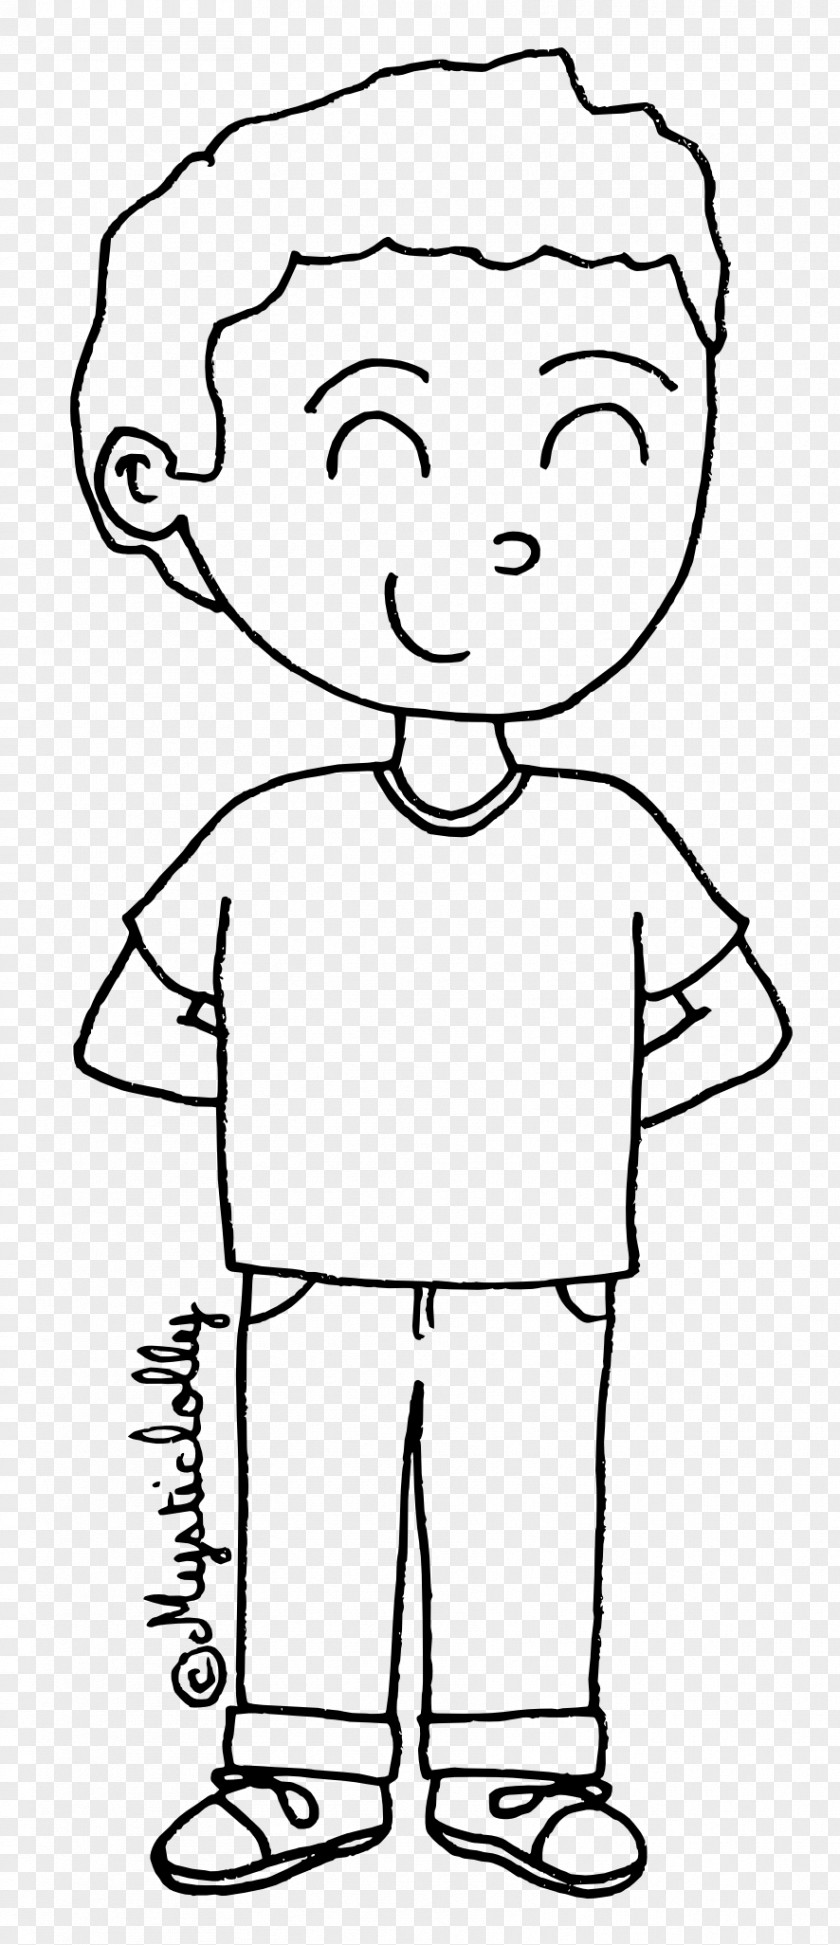 Toddler Tshirt School Black And White PNG